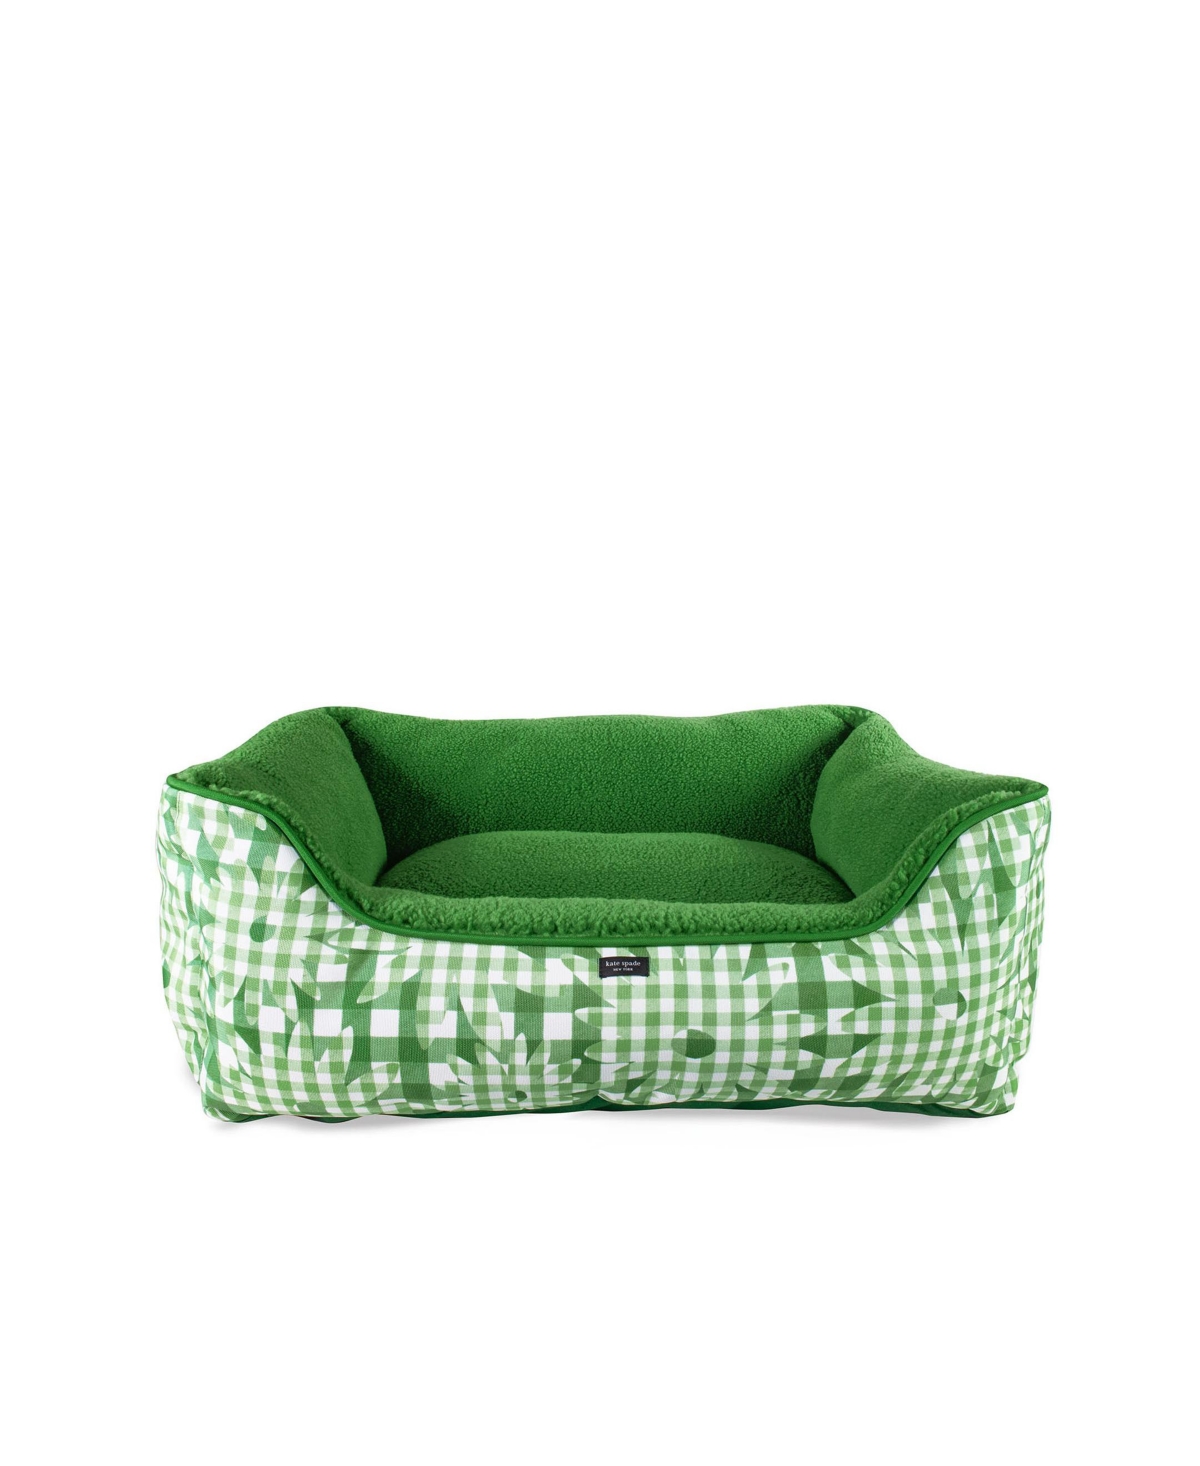 Pet Bed - Green Daisy Gingham